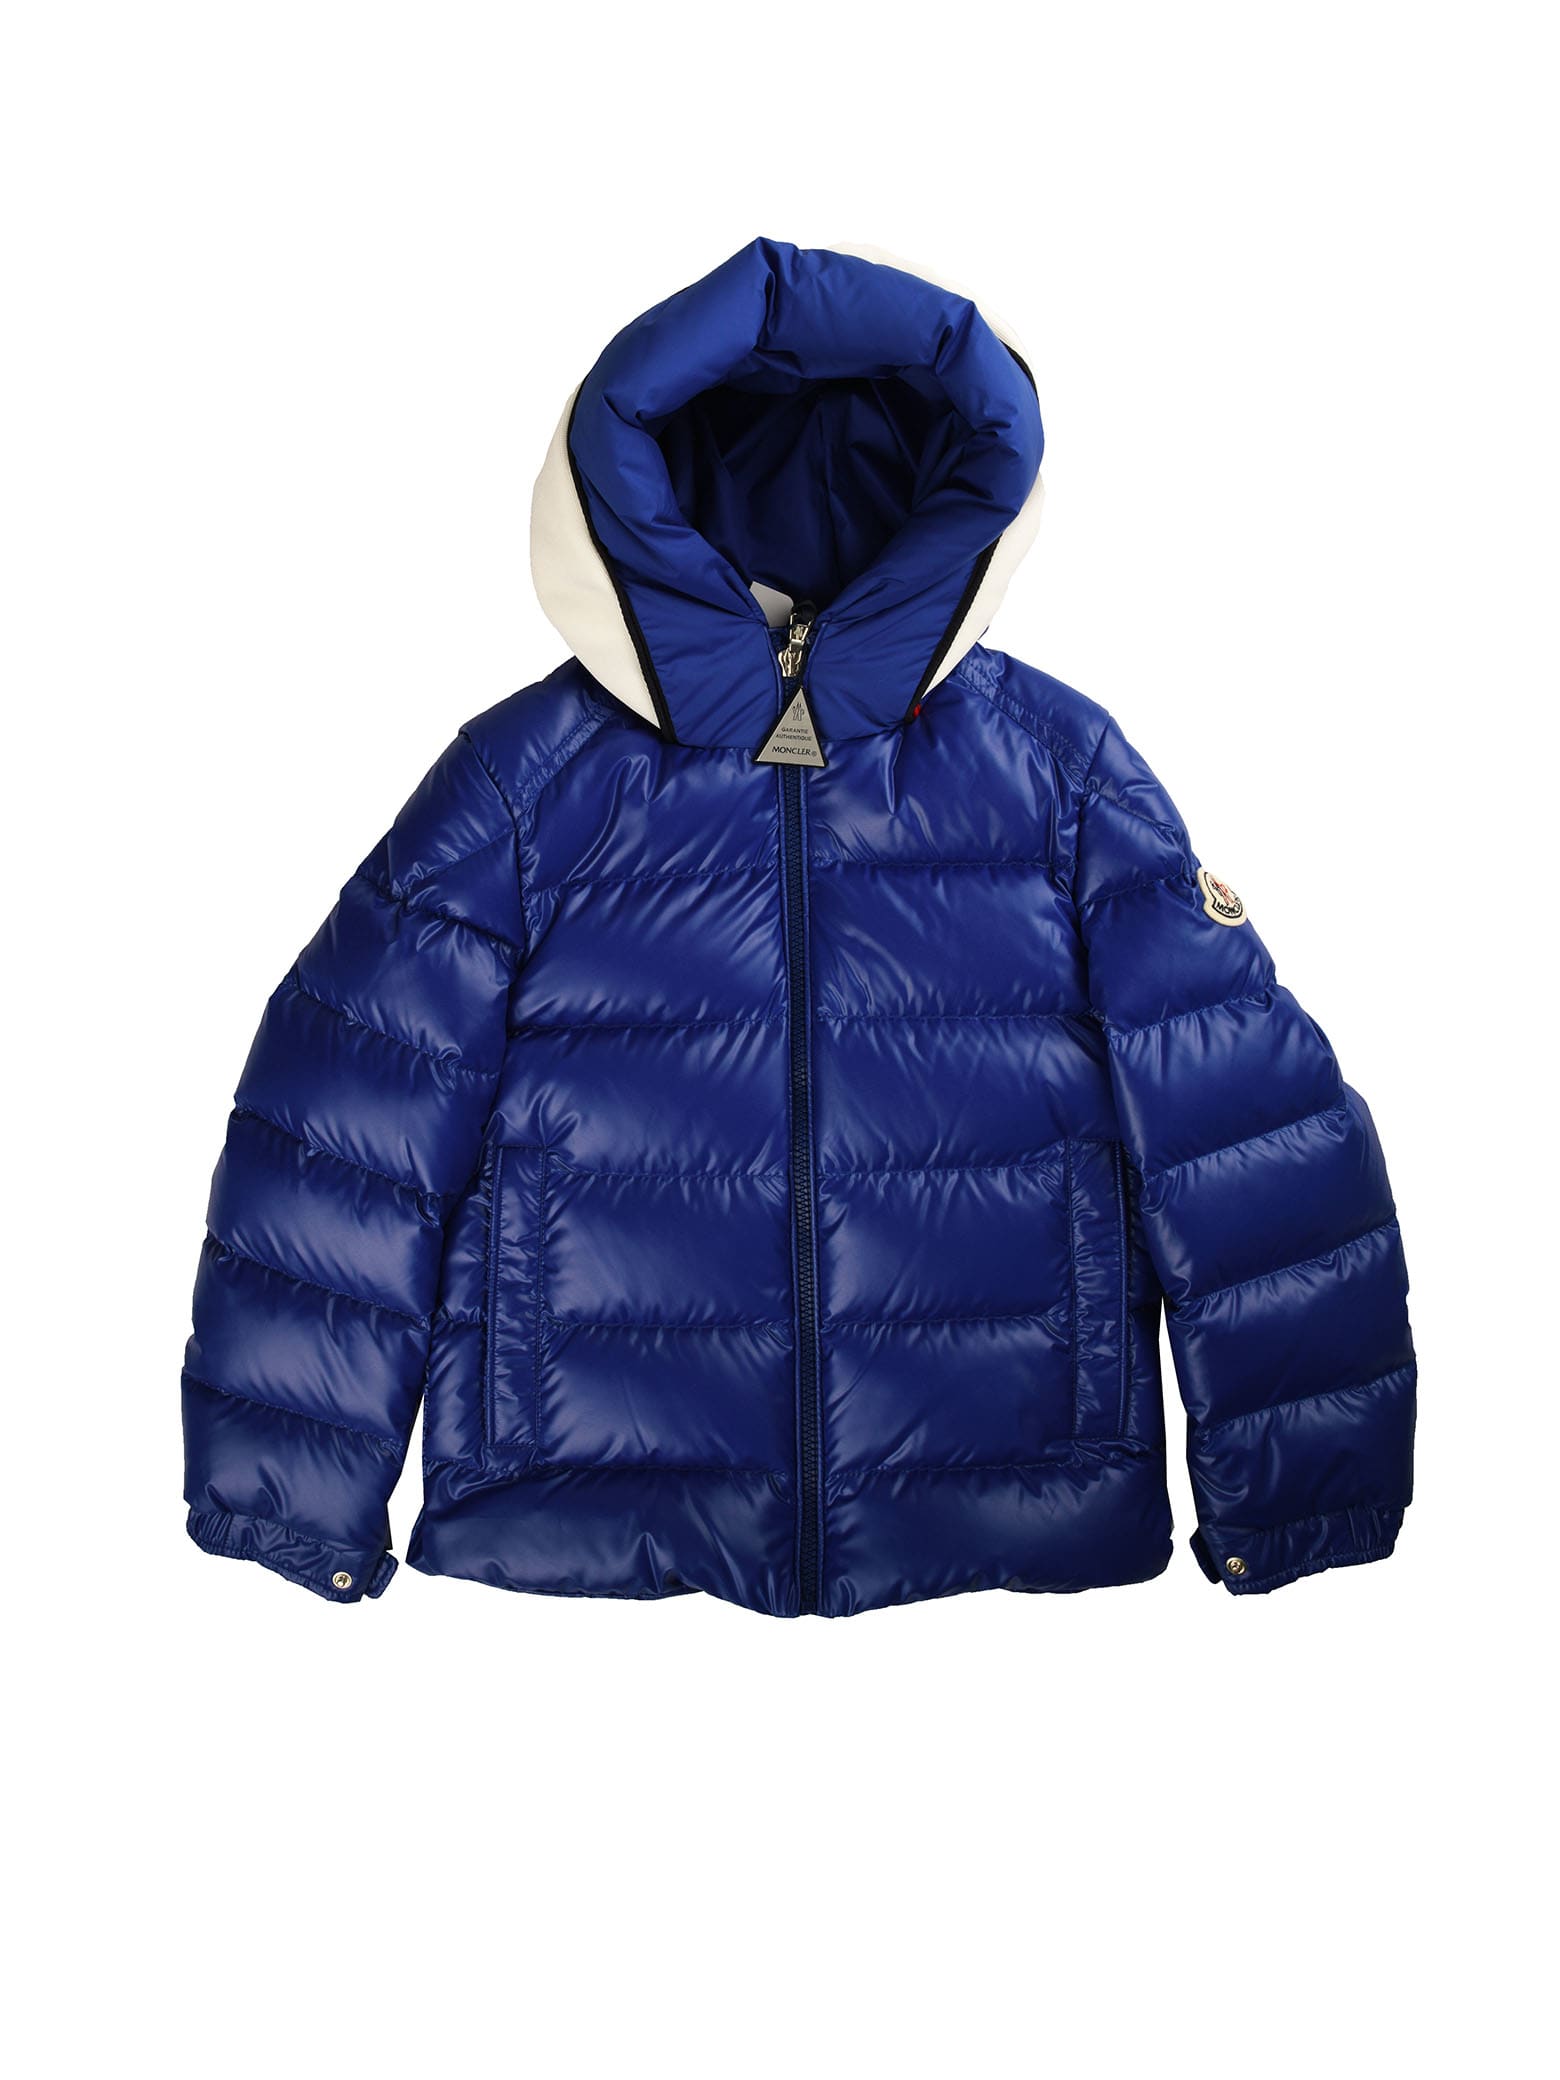 Moncler Bluette Jacket With Hood Writing